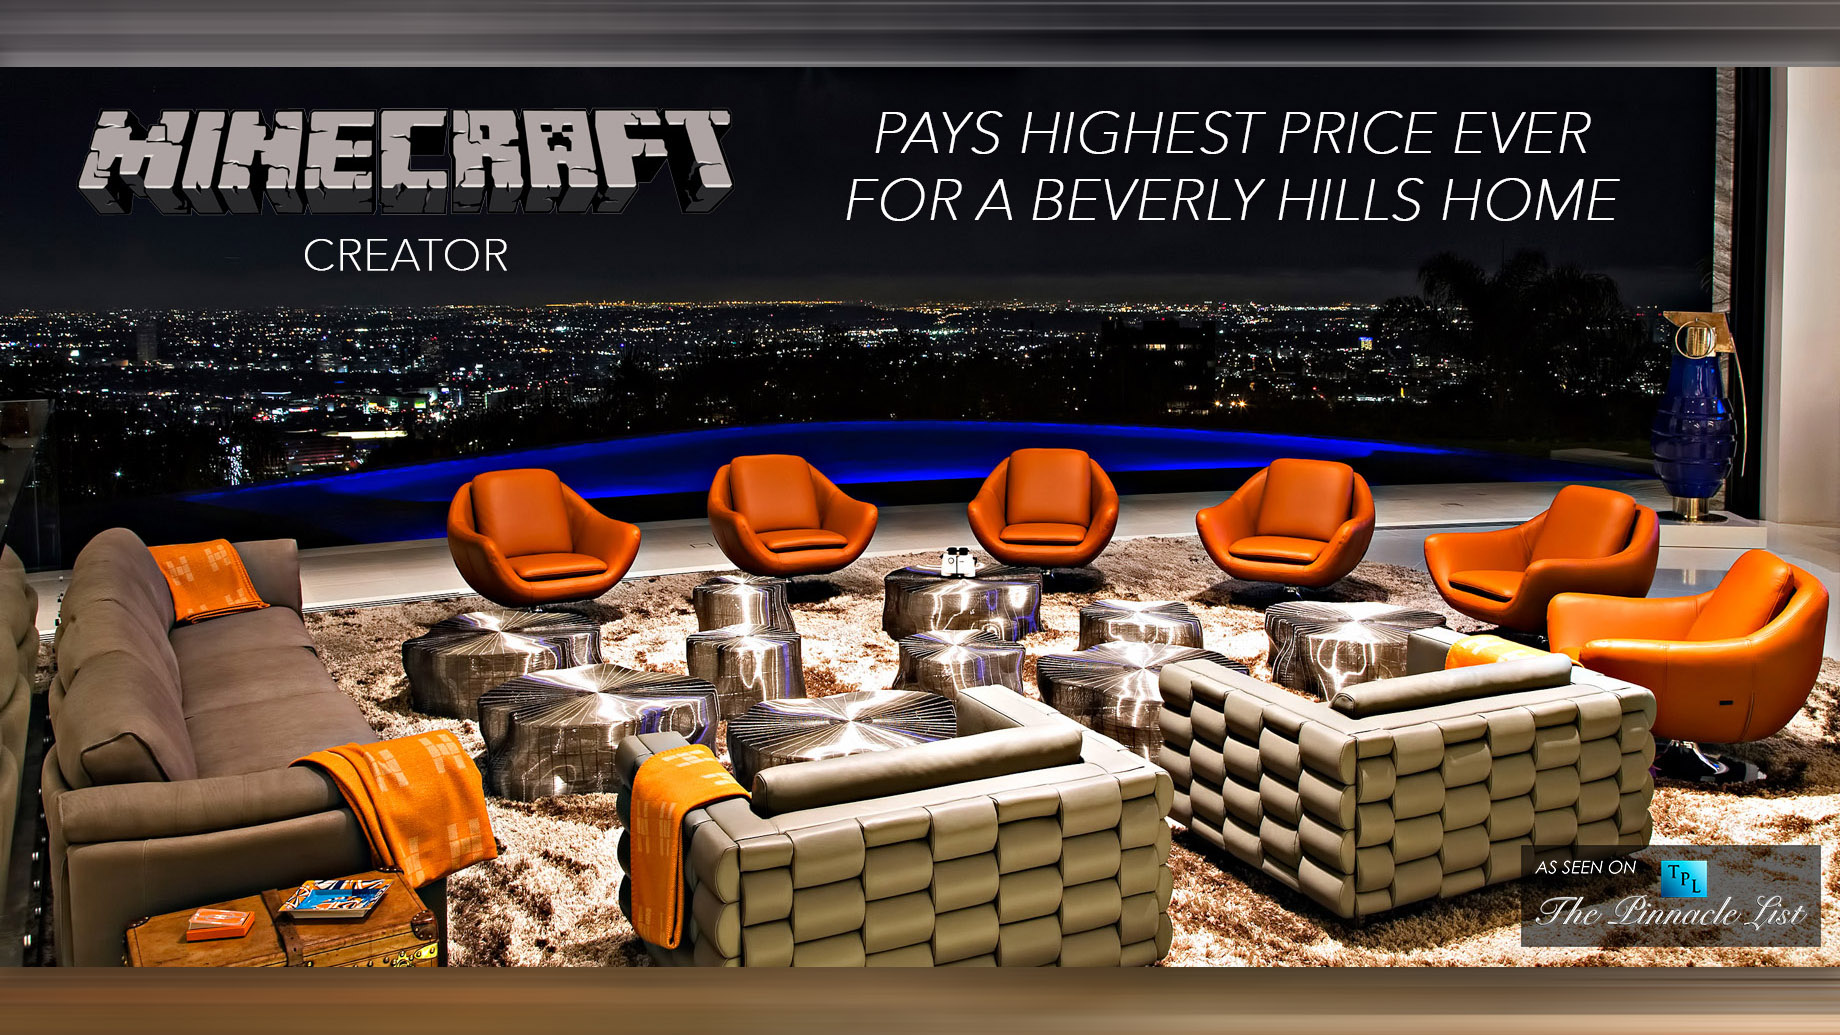 Minecraft Creator Pays $70 Million - The Highest Price Ever for a Beverly Hills Home